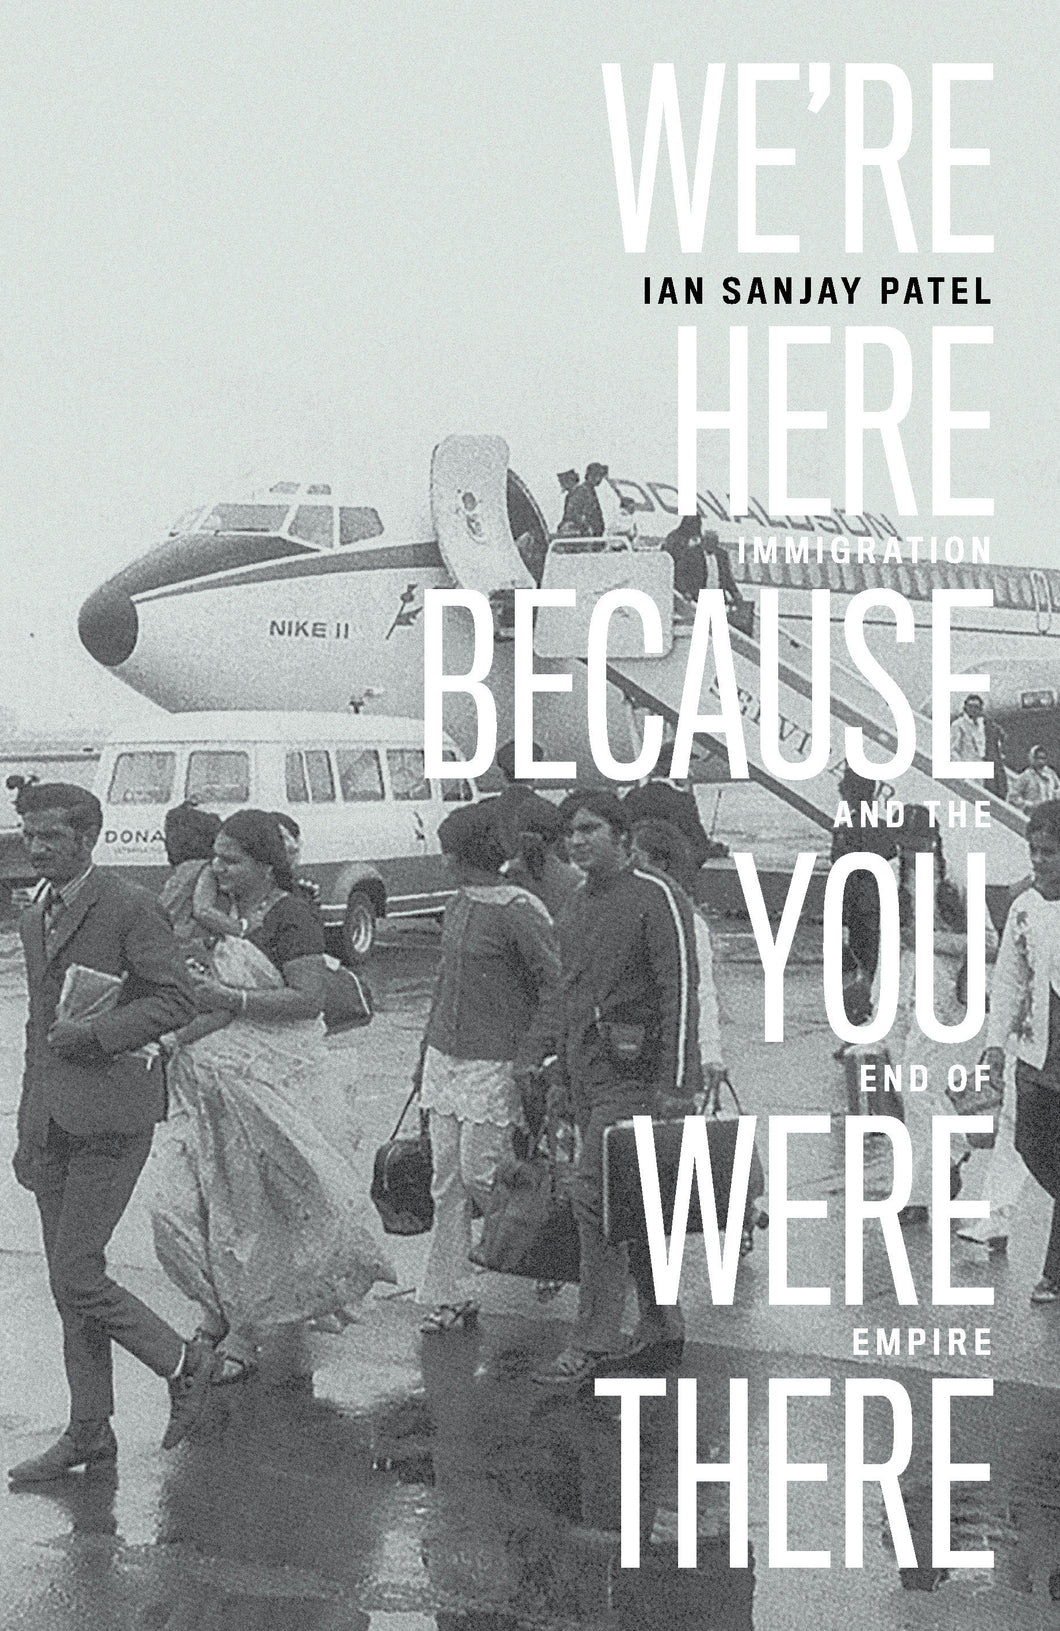 We're Here Because You Were There: Immigration and the End of Empire